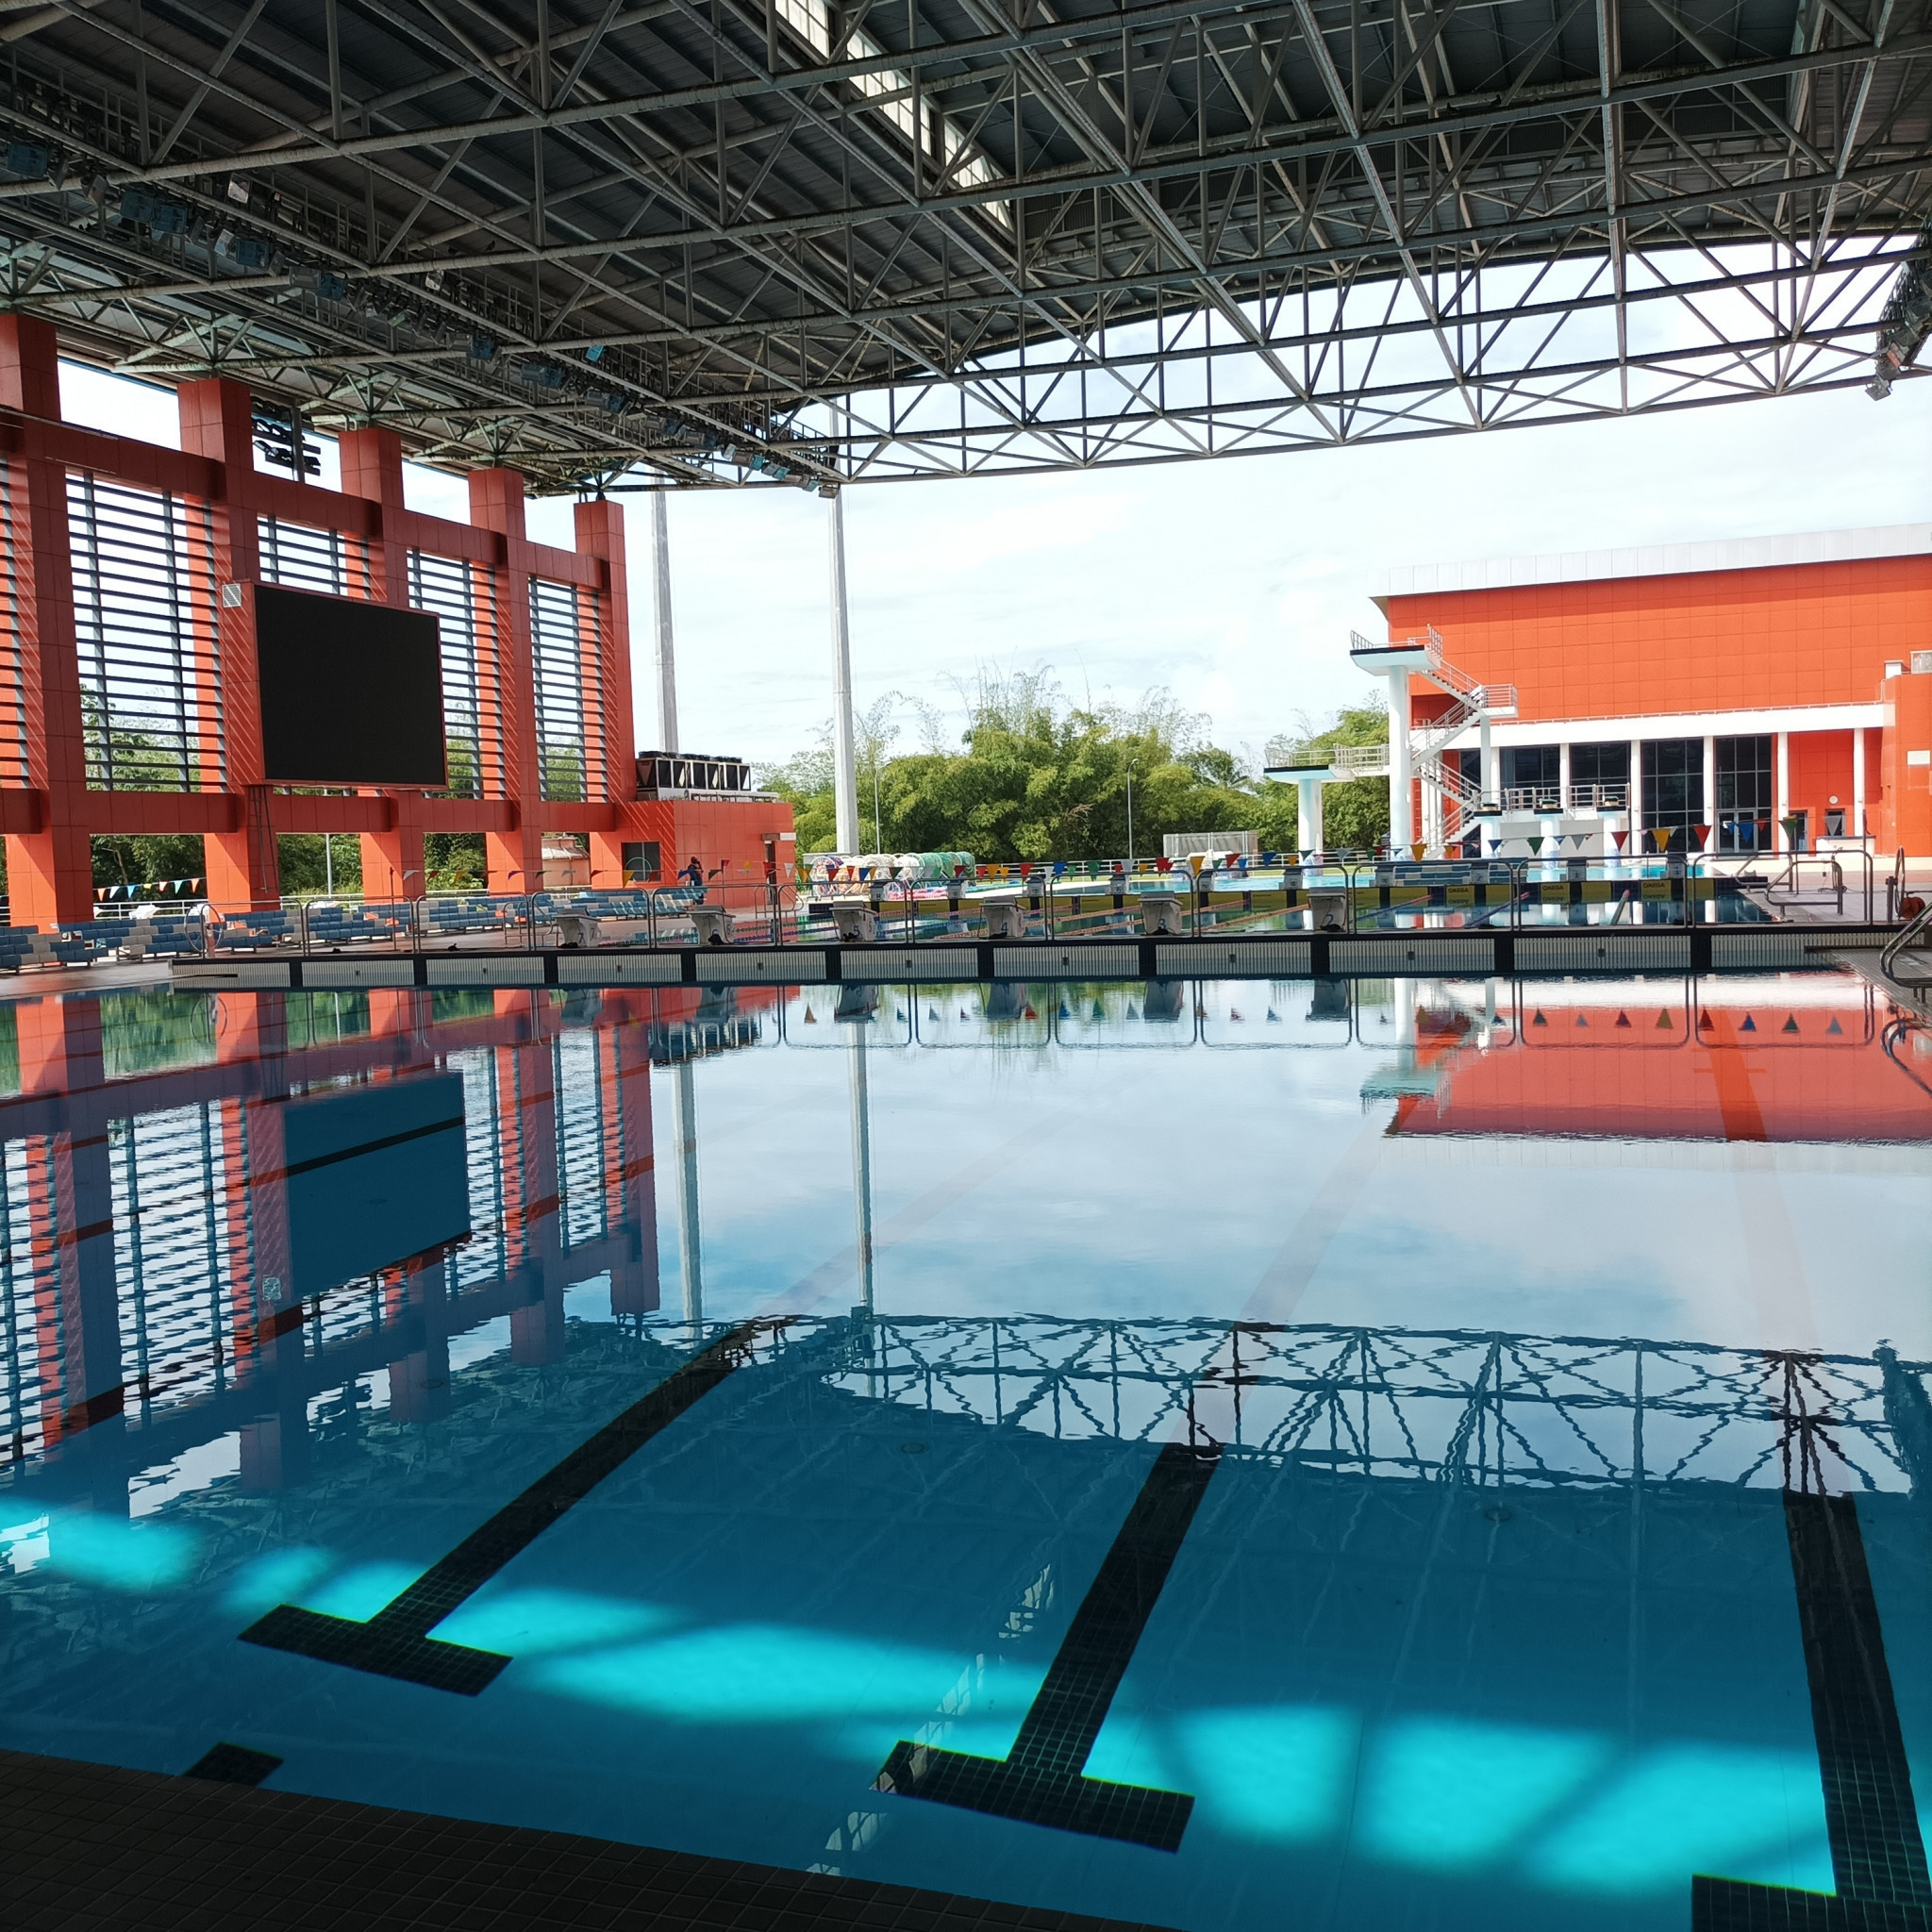 Swimming at Trinbago 2023 will take place in Couva on the outskirts of Port of Spain ©ITG